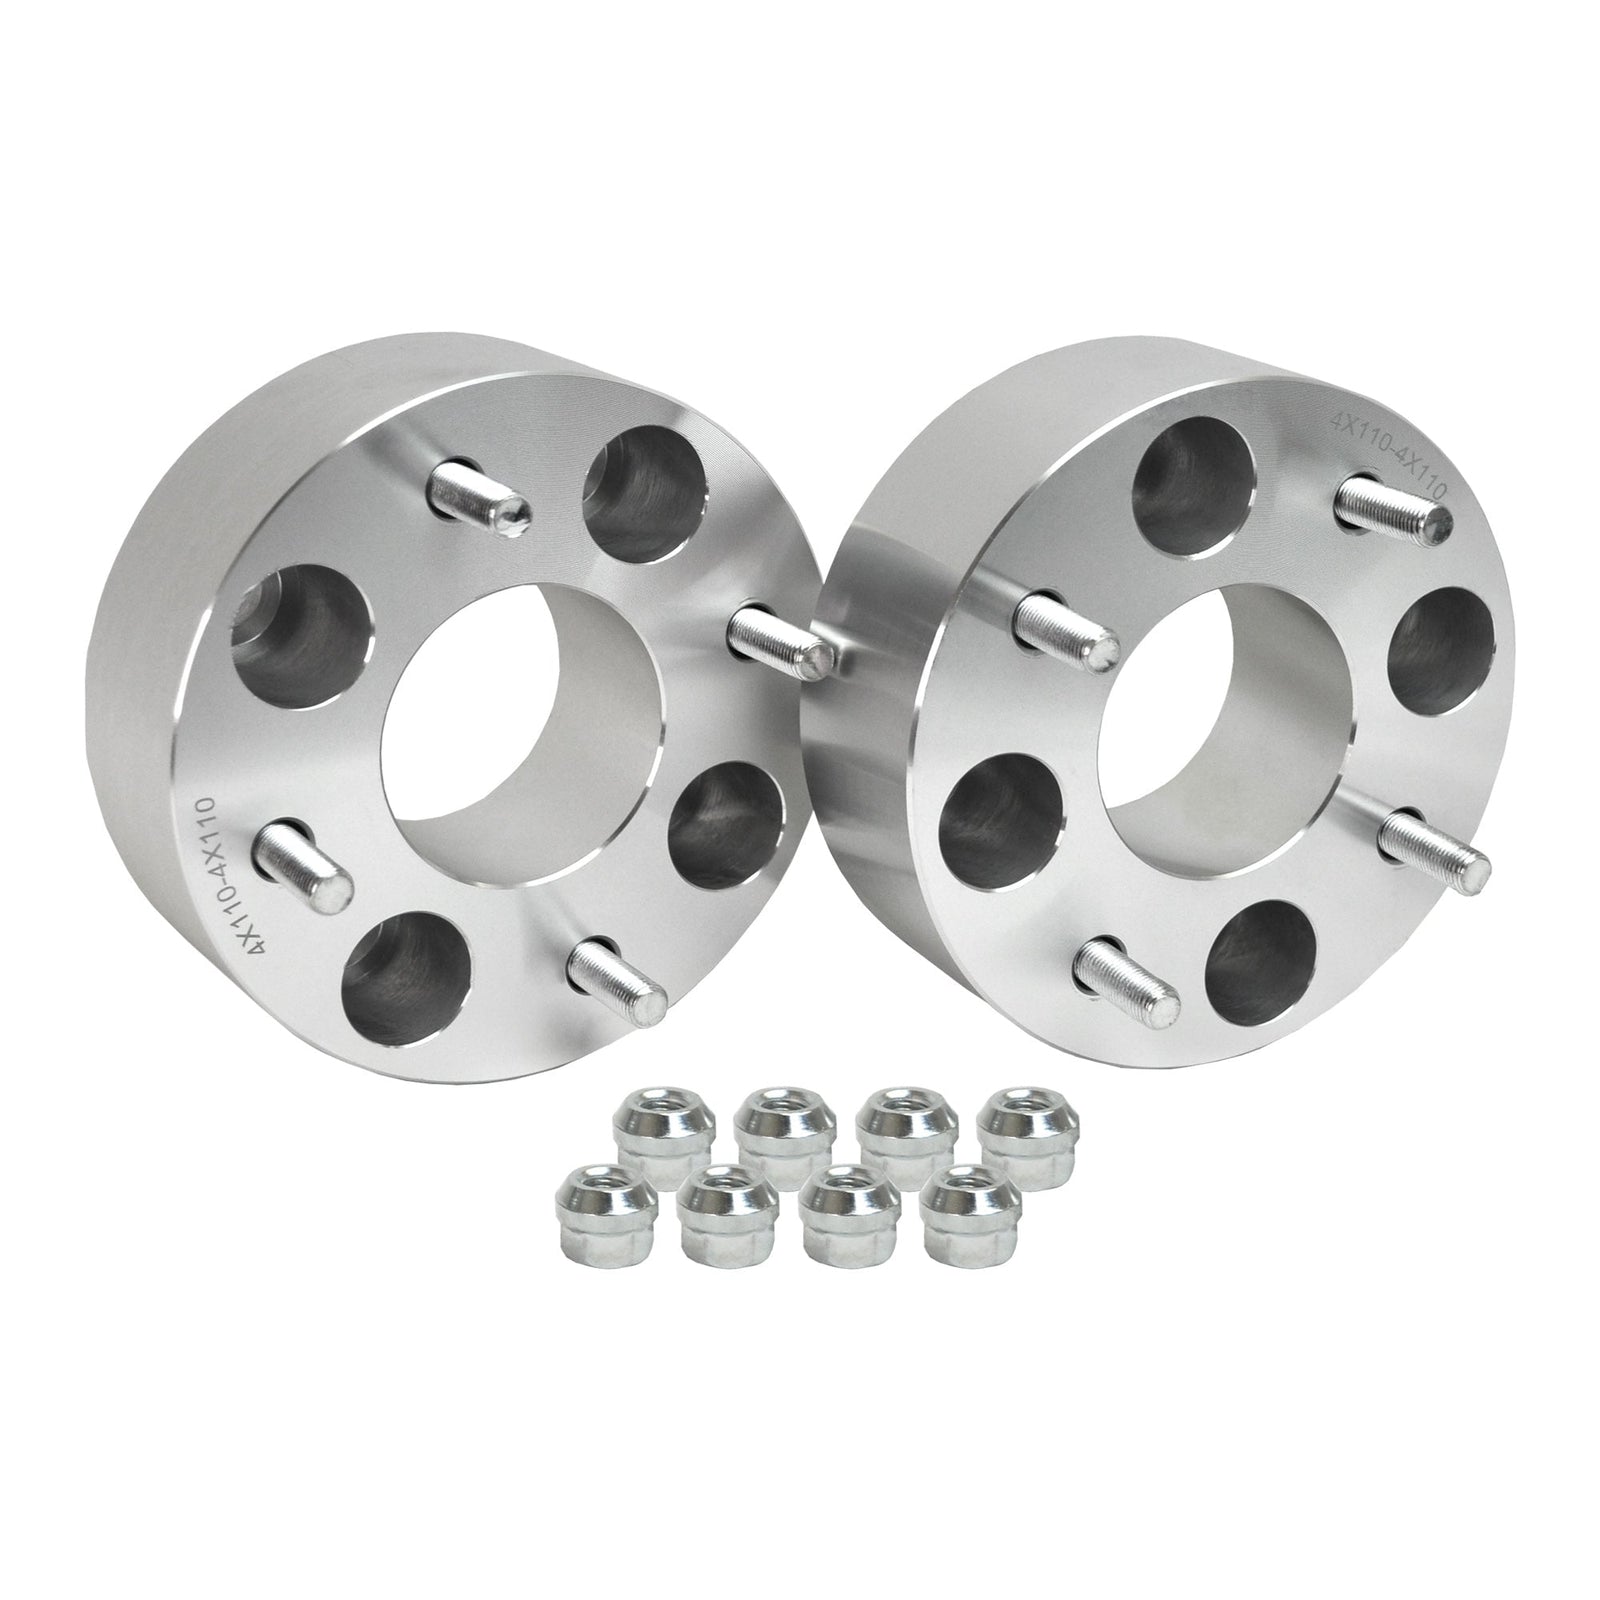 Arctic Cat XR 500 Rugged Wheel Spacer